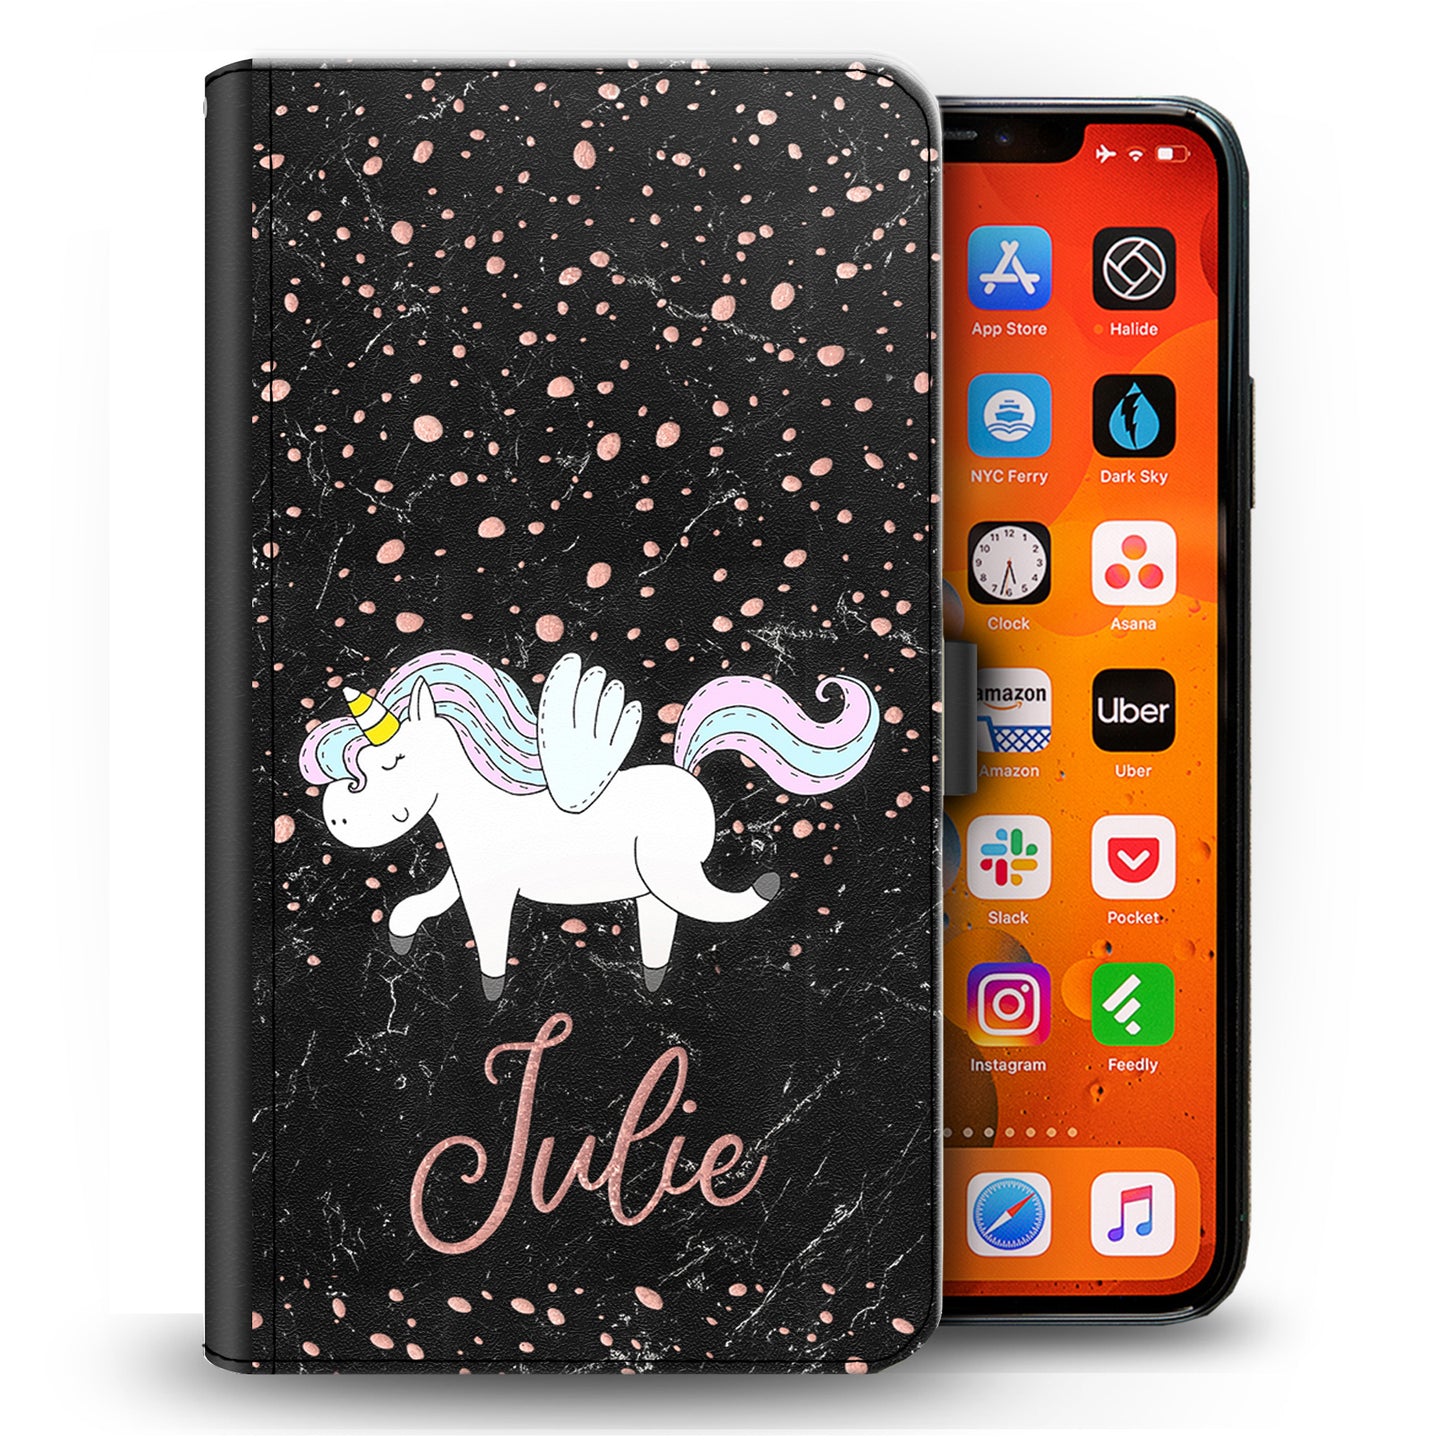 Personalised LG Phone Leather Wallet with Winged Unicorn and Pink Text on Black Marble 